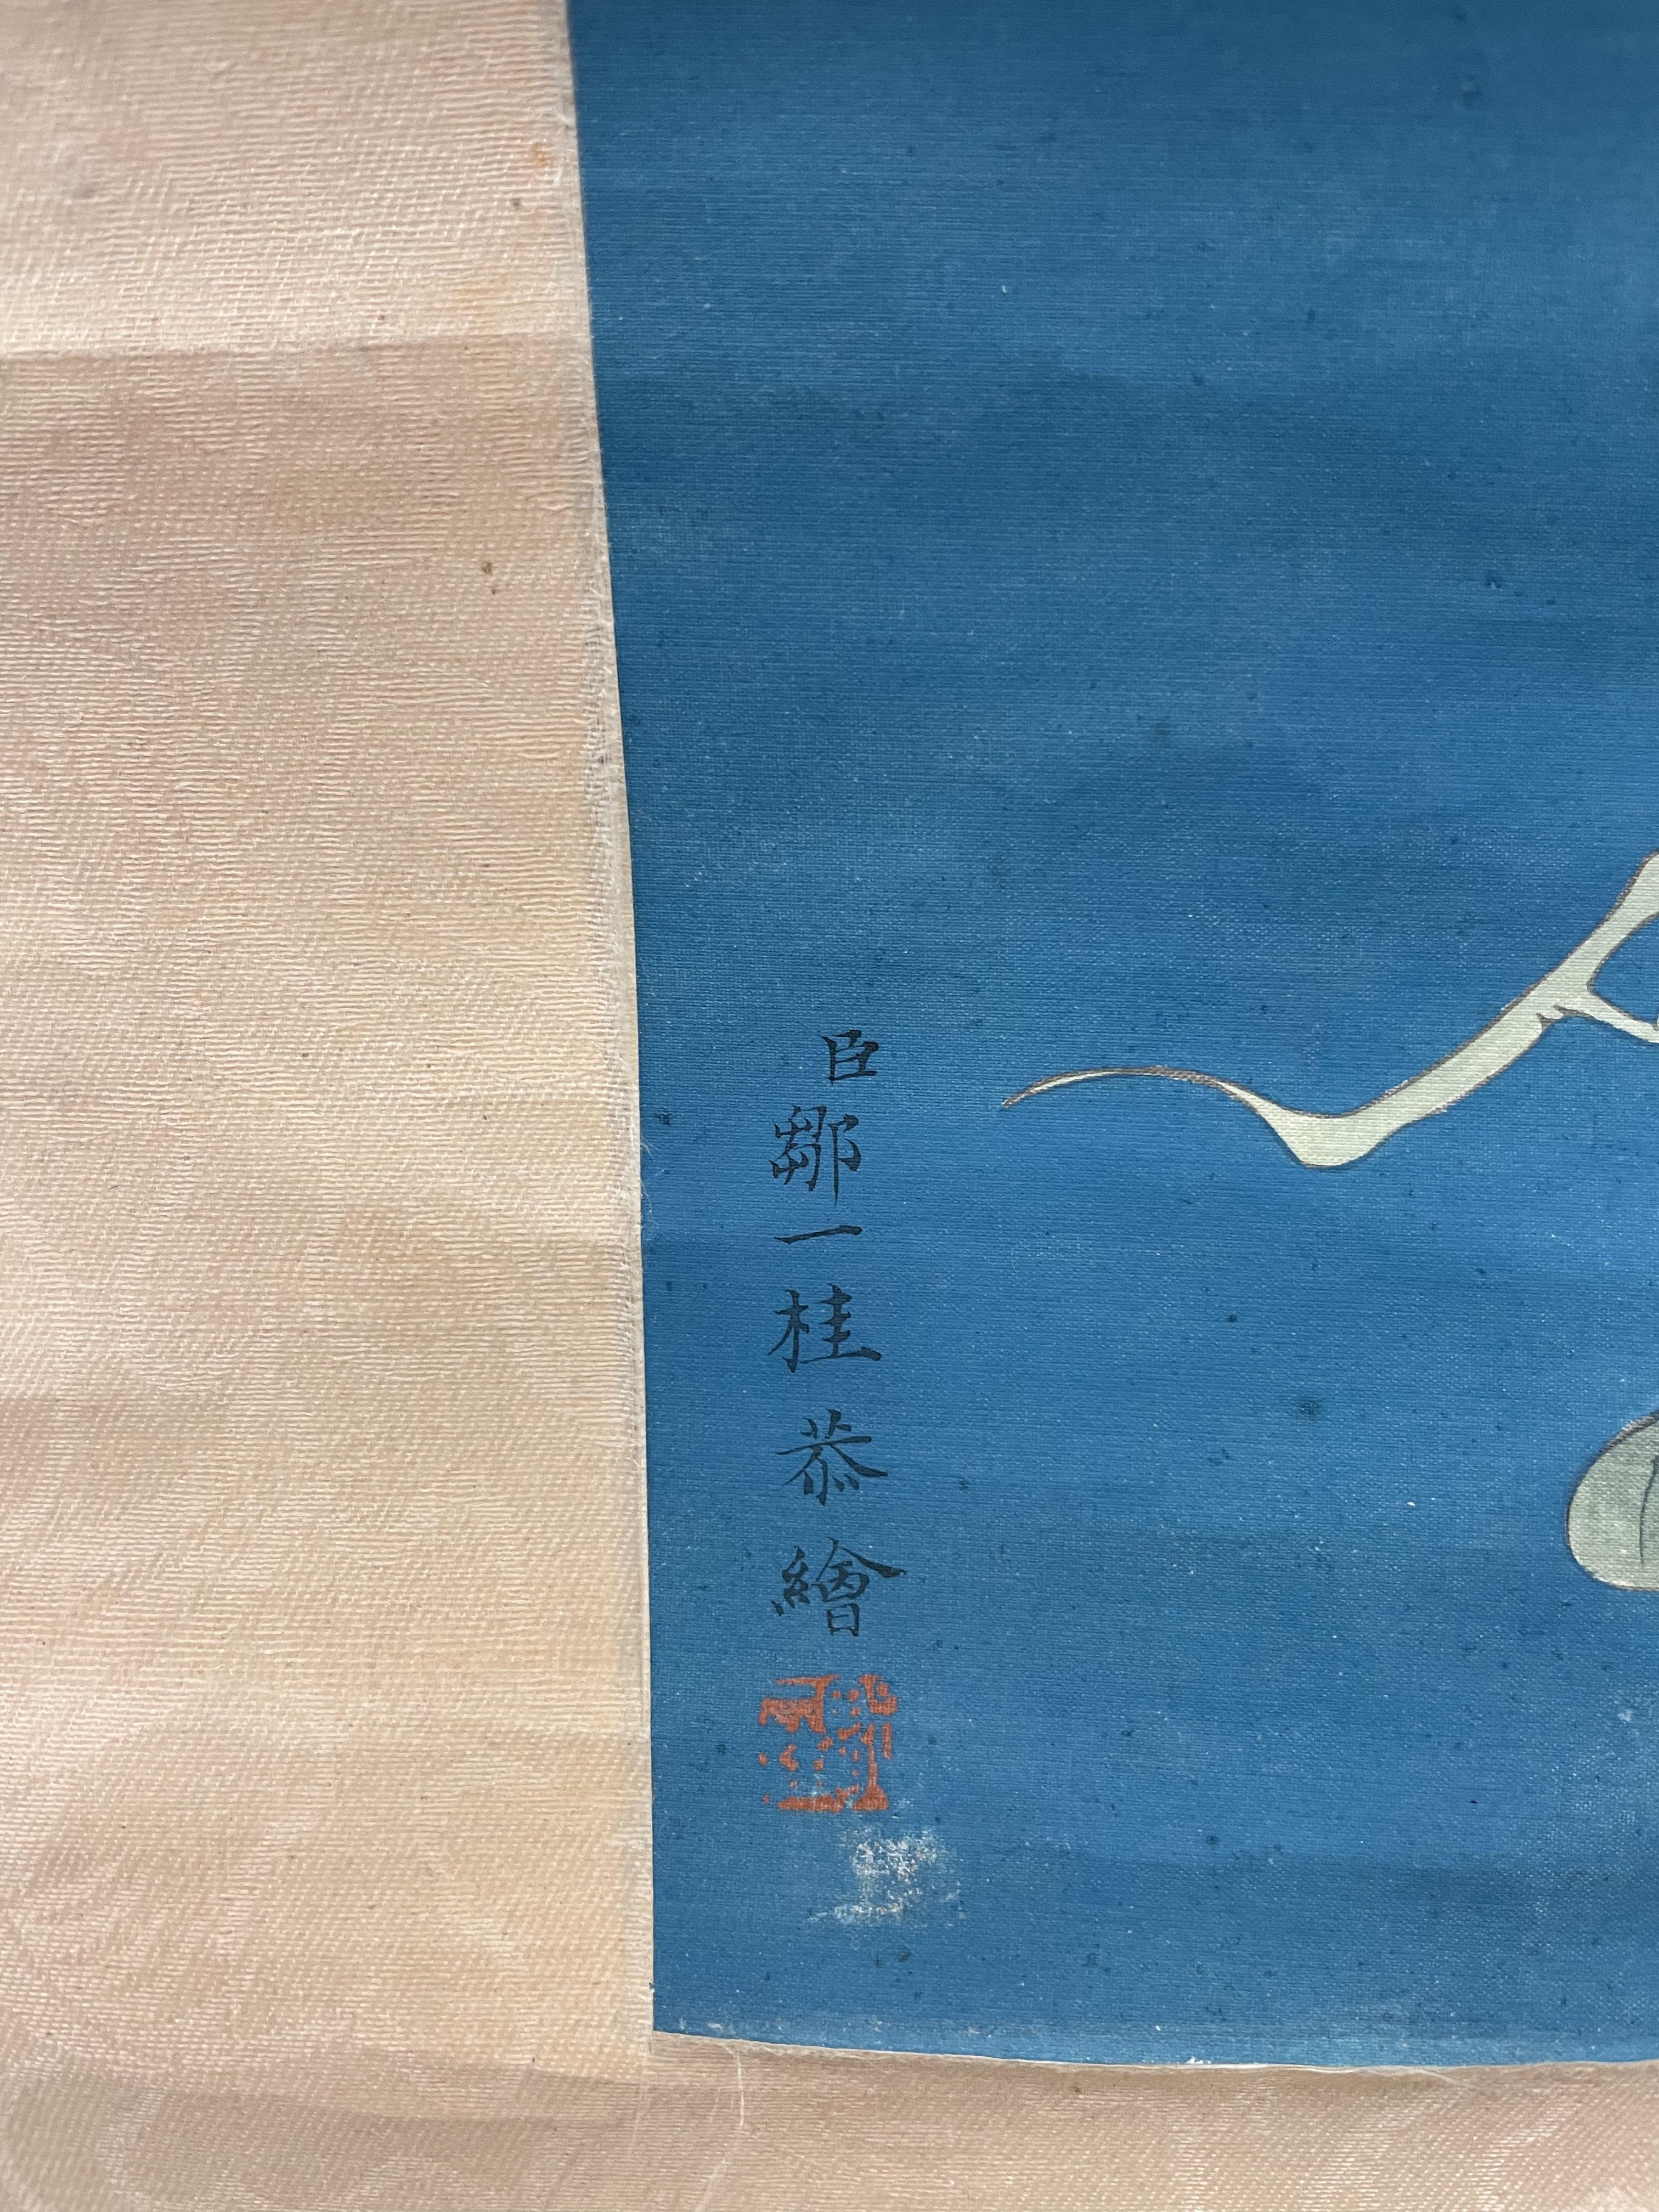 ZOU YIGUI 鄒一桂 (Wuxi, China, 1686 - 1772) Four flower paintings 花卉軸四件 - Image 9 of 17